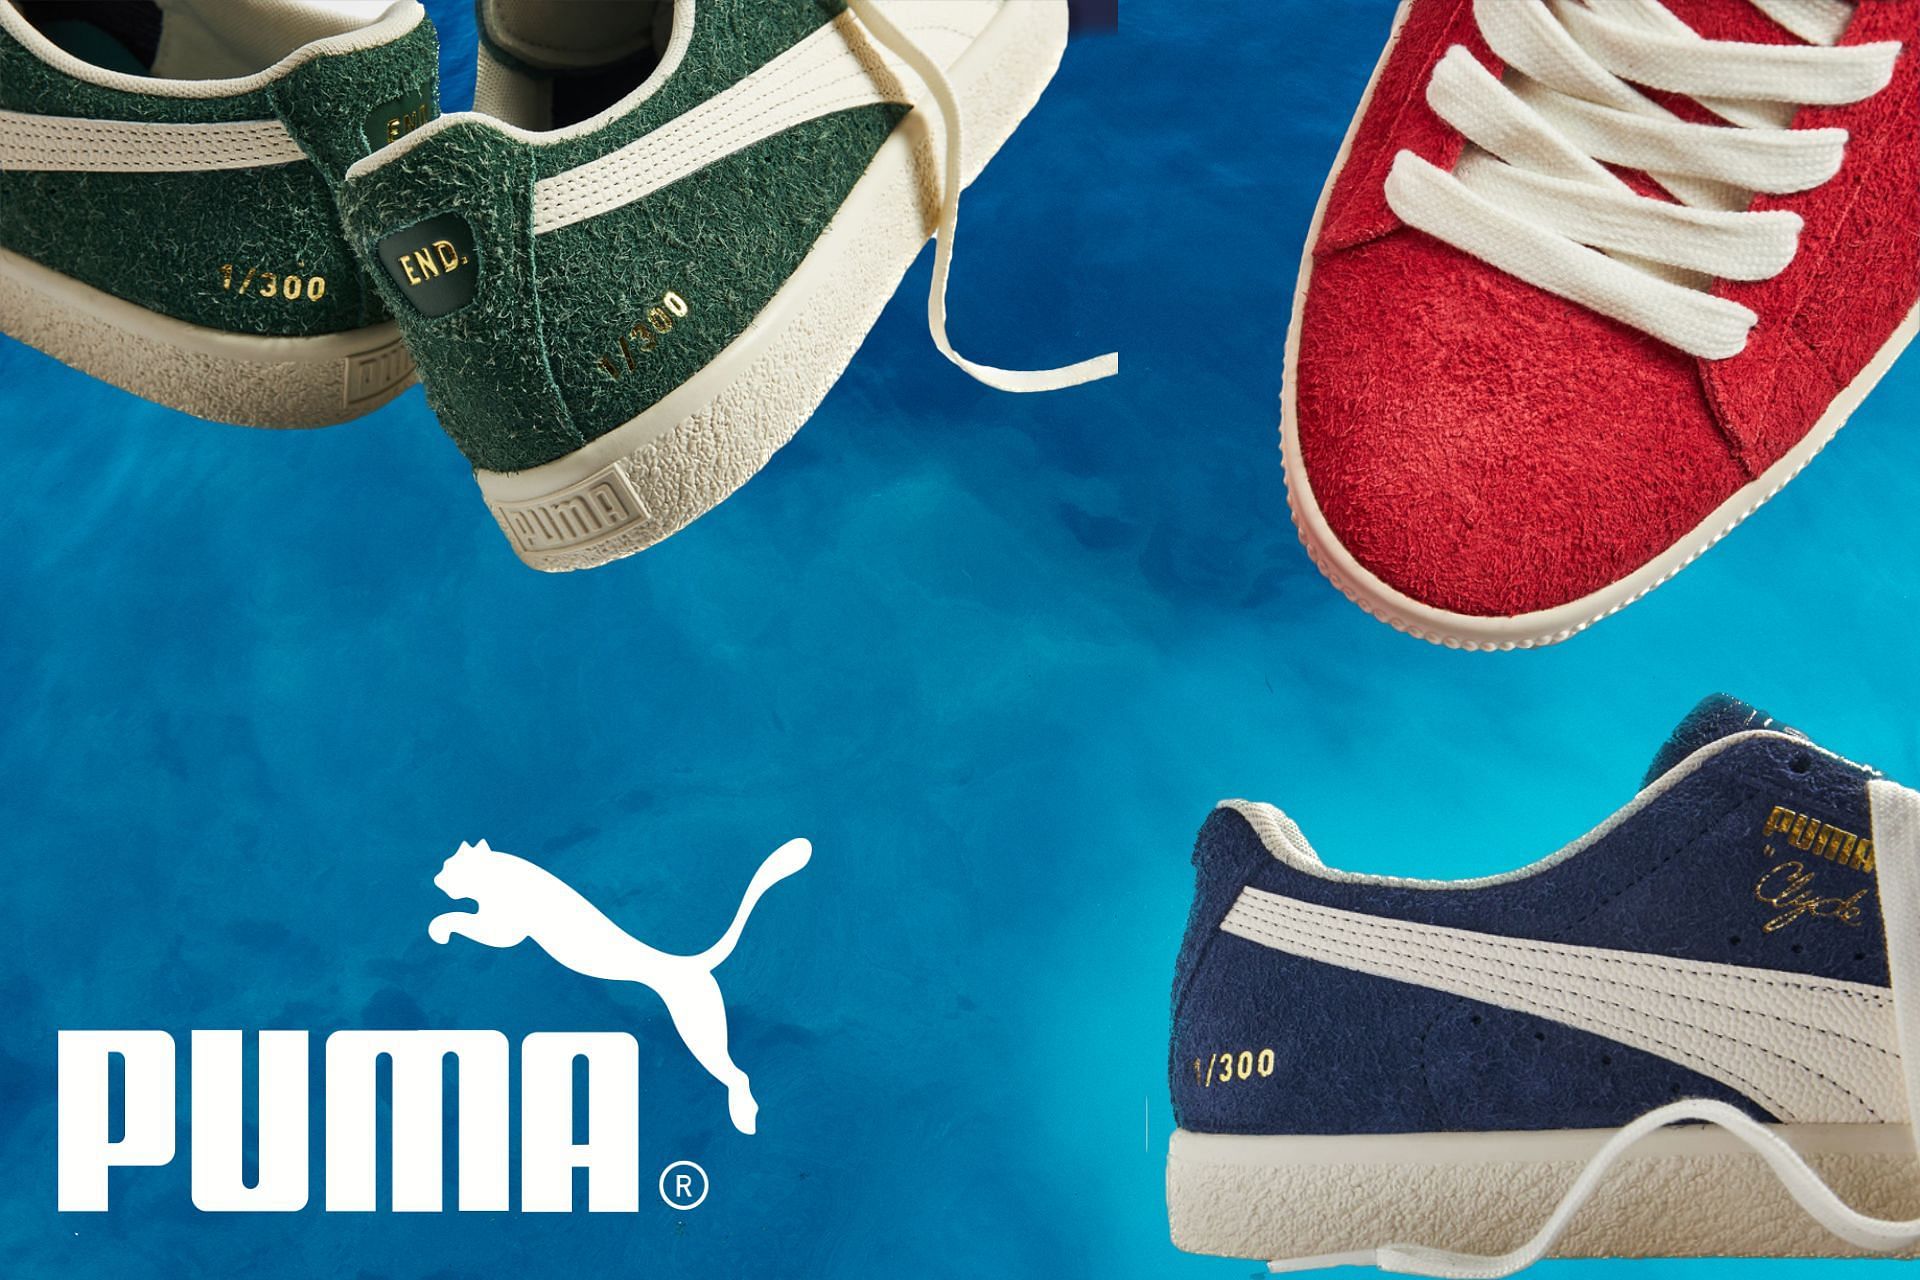 Finanzas repetir Sangrar END. Clothing: END. Clothing x Puma Clyde OG Pack shoes: Where to buy,  price, release date, and more details explored